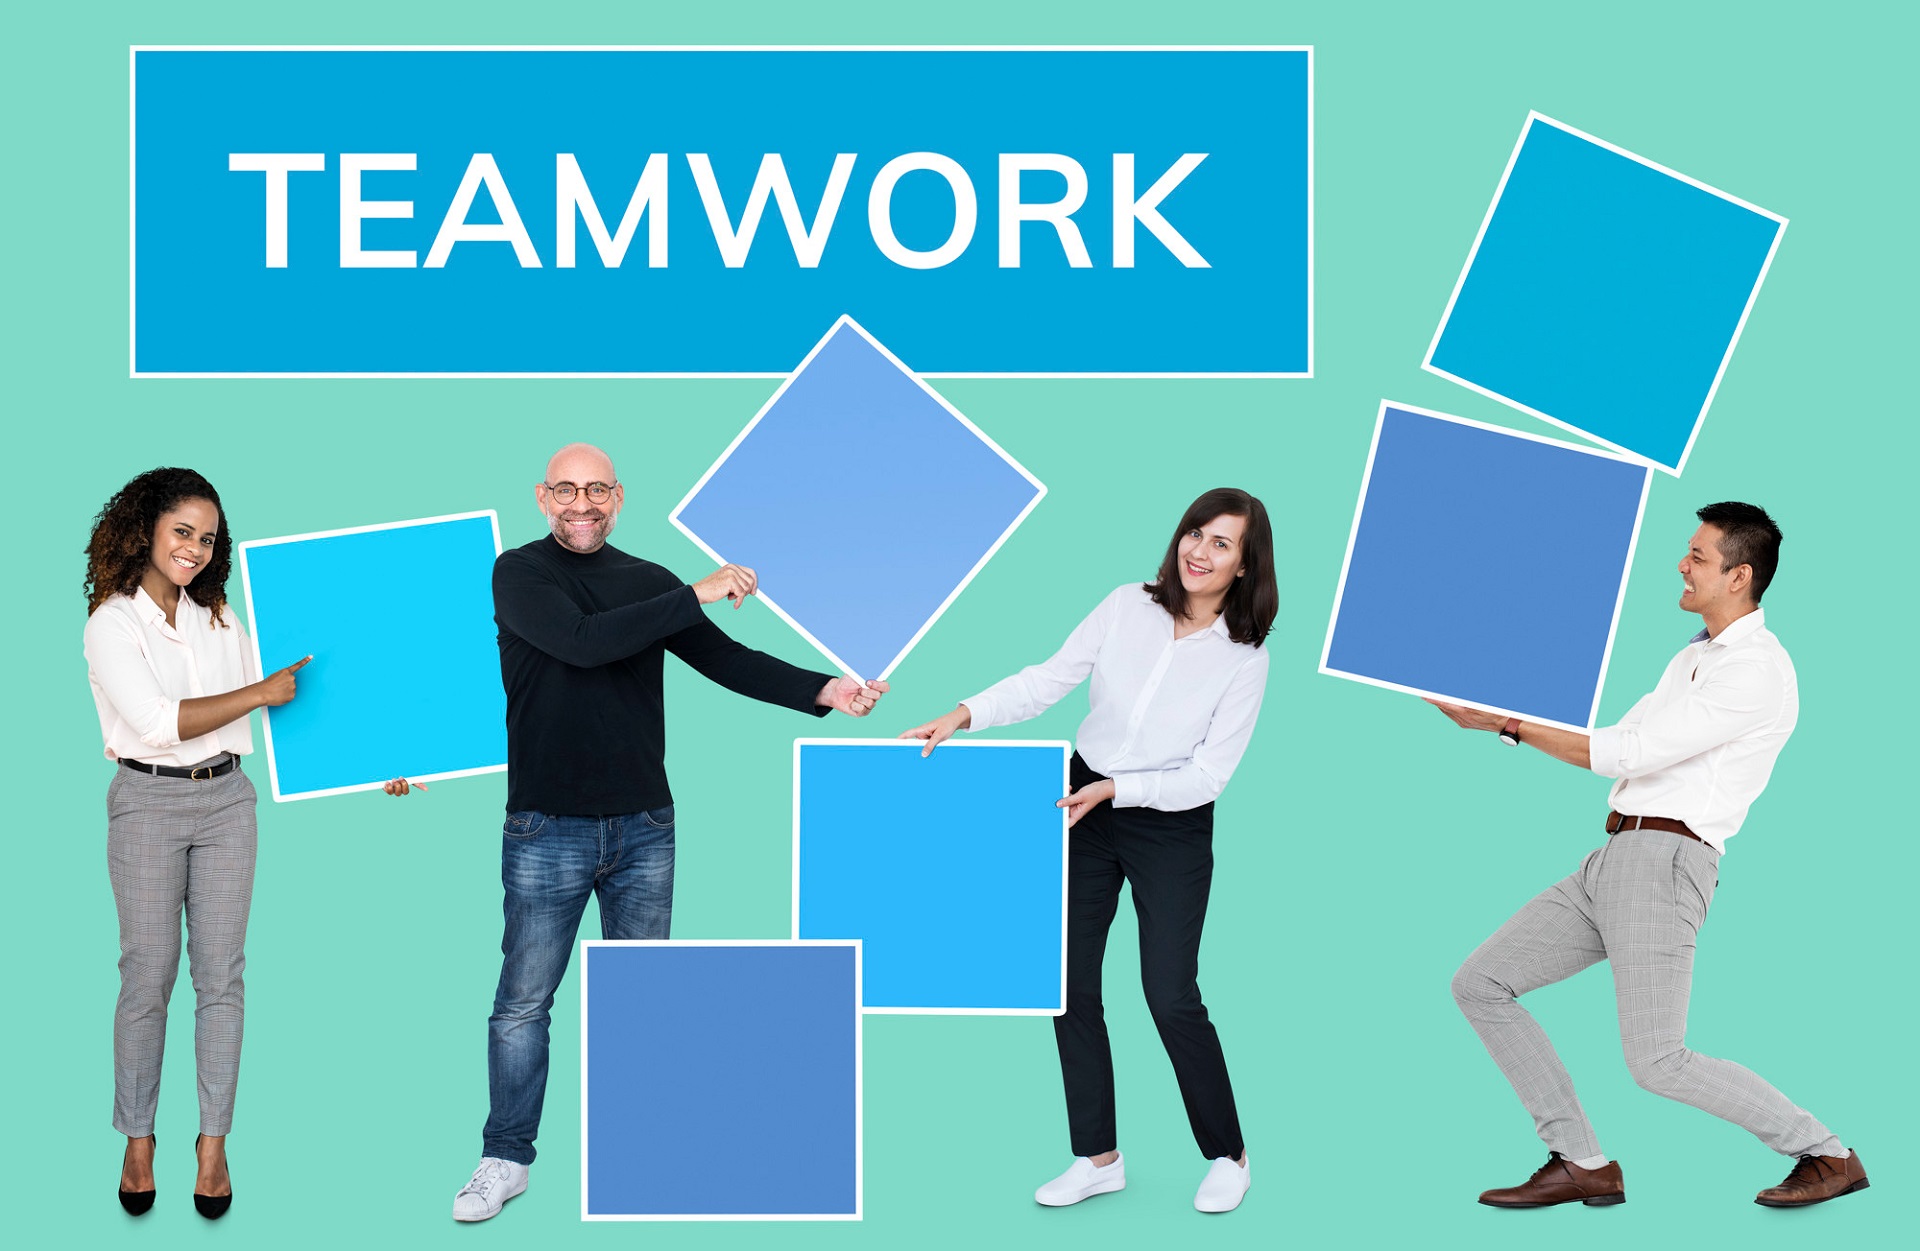 What role does teamwork play in IT services?